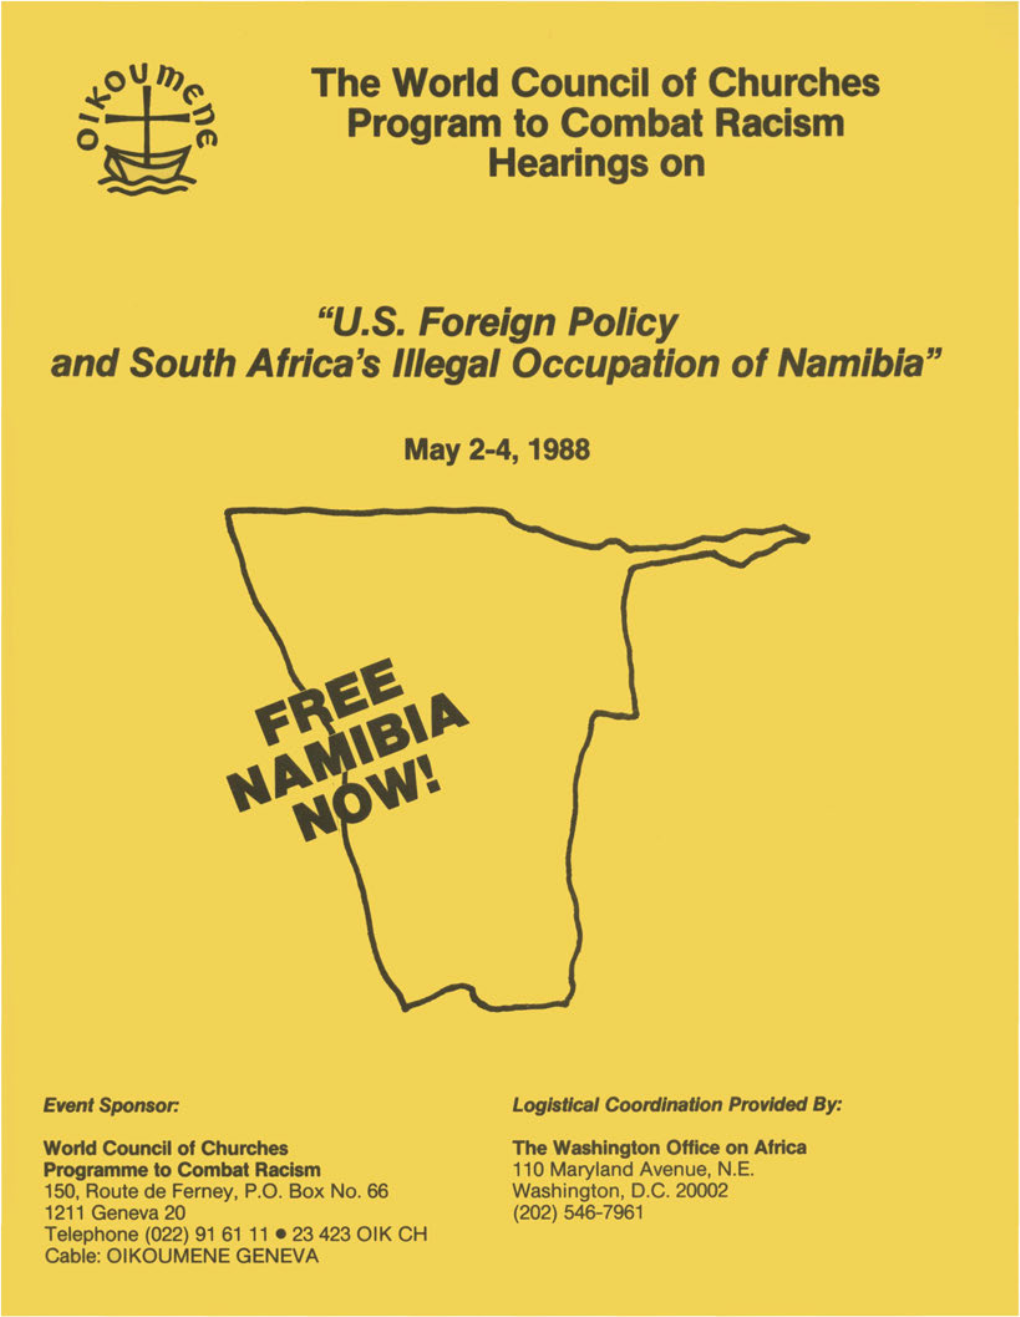 THE WORLD COUNCIL of CHURCHES PROGRAM to COMBAT RACISM HEARINGS on NAMIBIA Monday, May 2, 1988 to Wednesday, May 4,1981 9:00 A.M